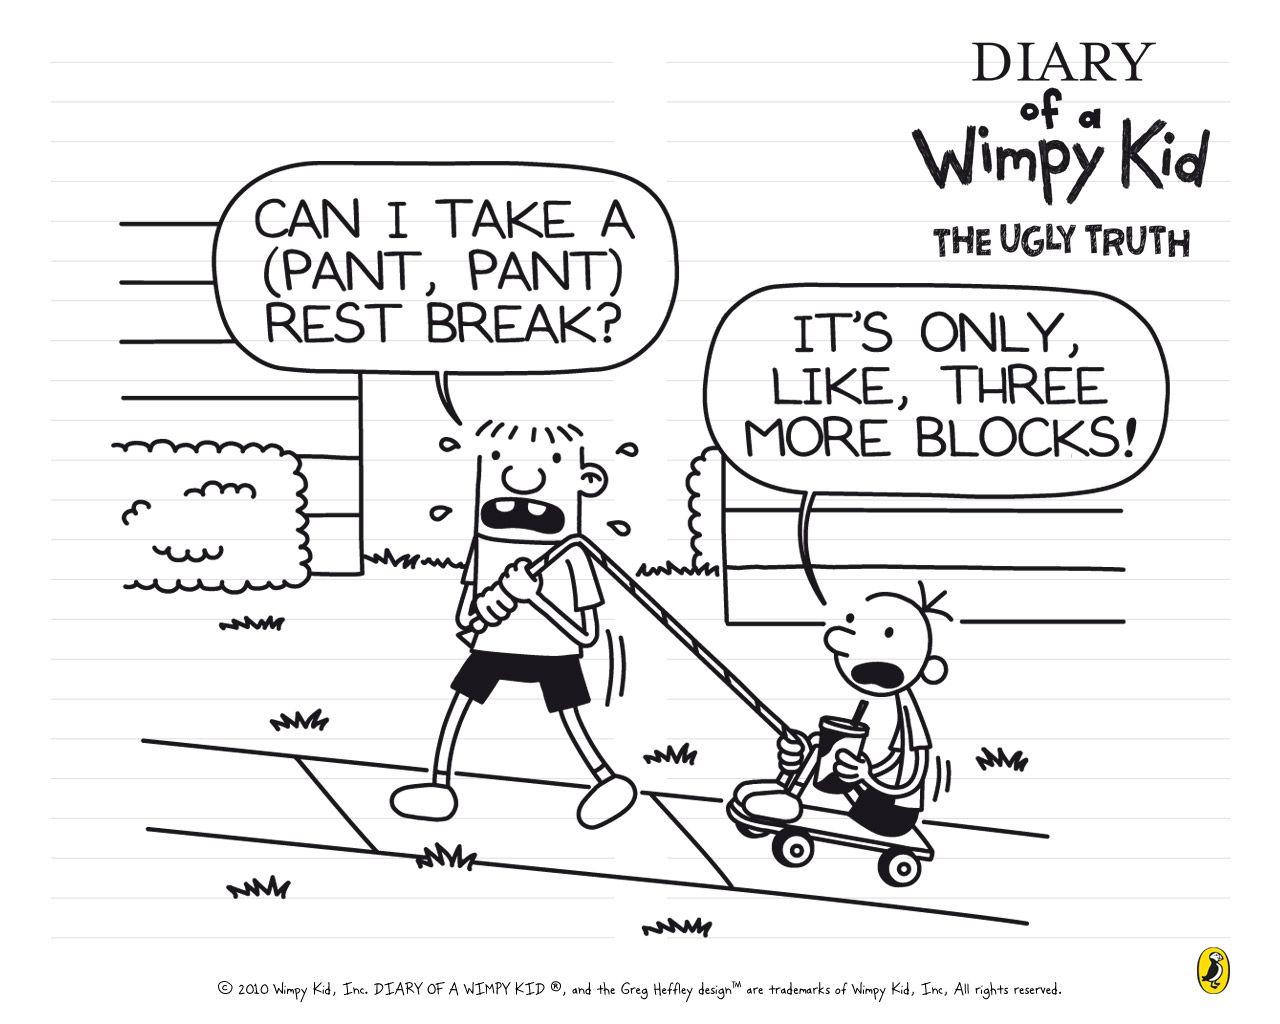 Awesome! Free 'The Ugly Truth' Wallpaper. Wimpy Kid Club